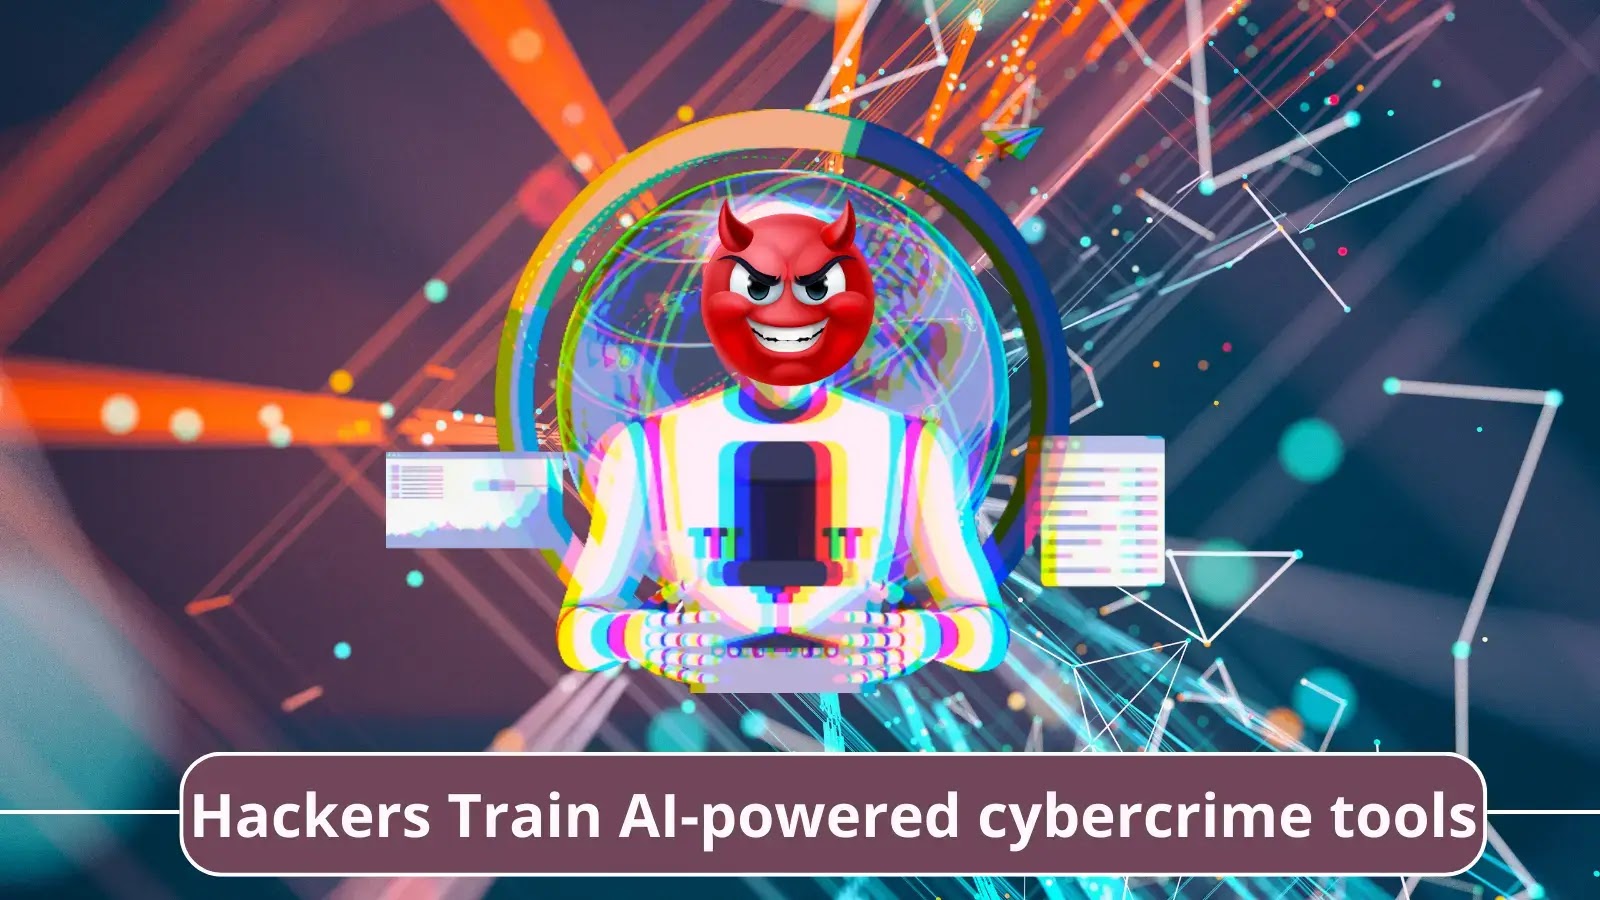 Hackers Train AI-powered cybercrime tools to launch Sophisticated Cyber Attacks